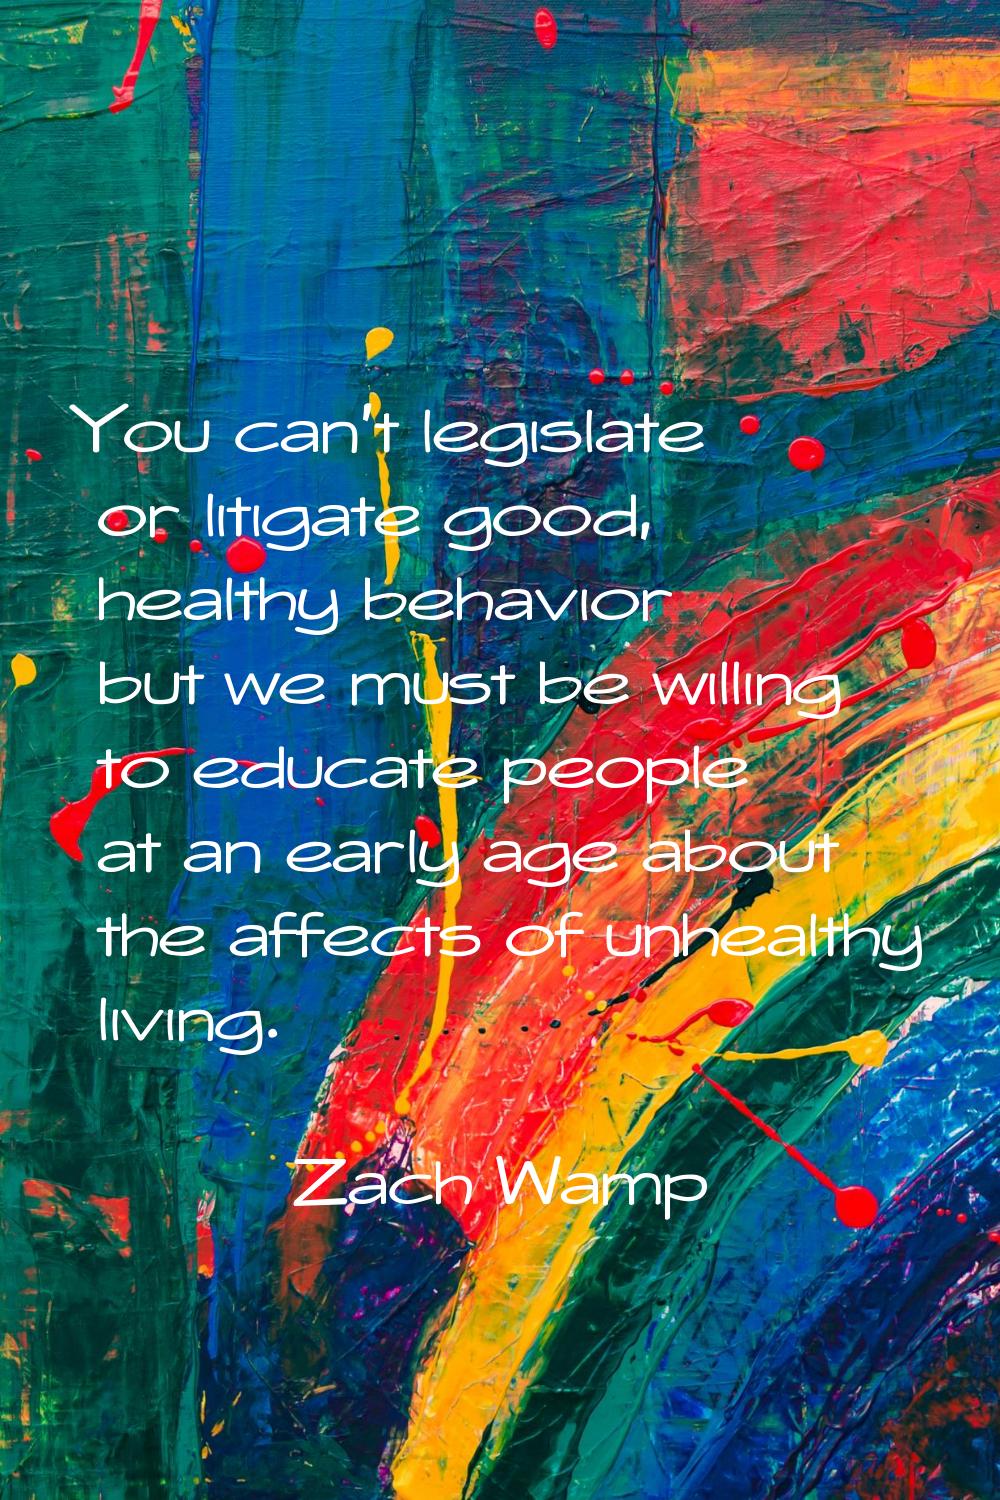 You can't legislate or litigate good, healthy behavior but we must be willing to educate people at 